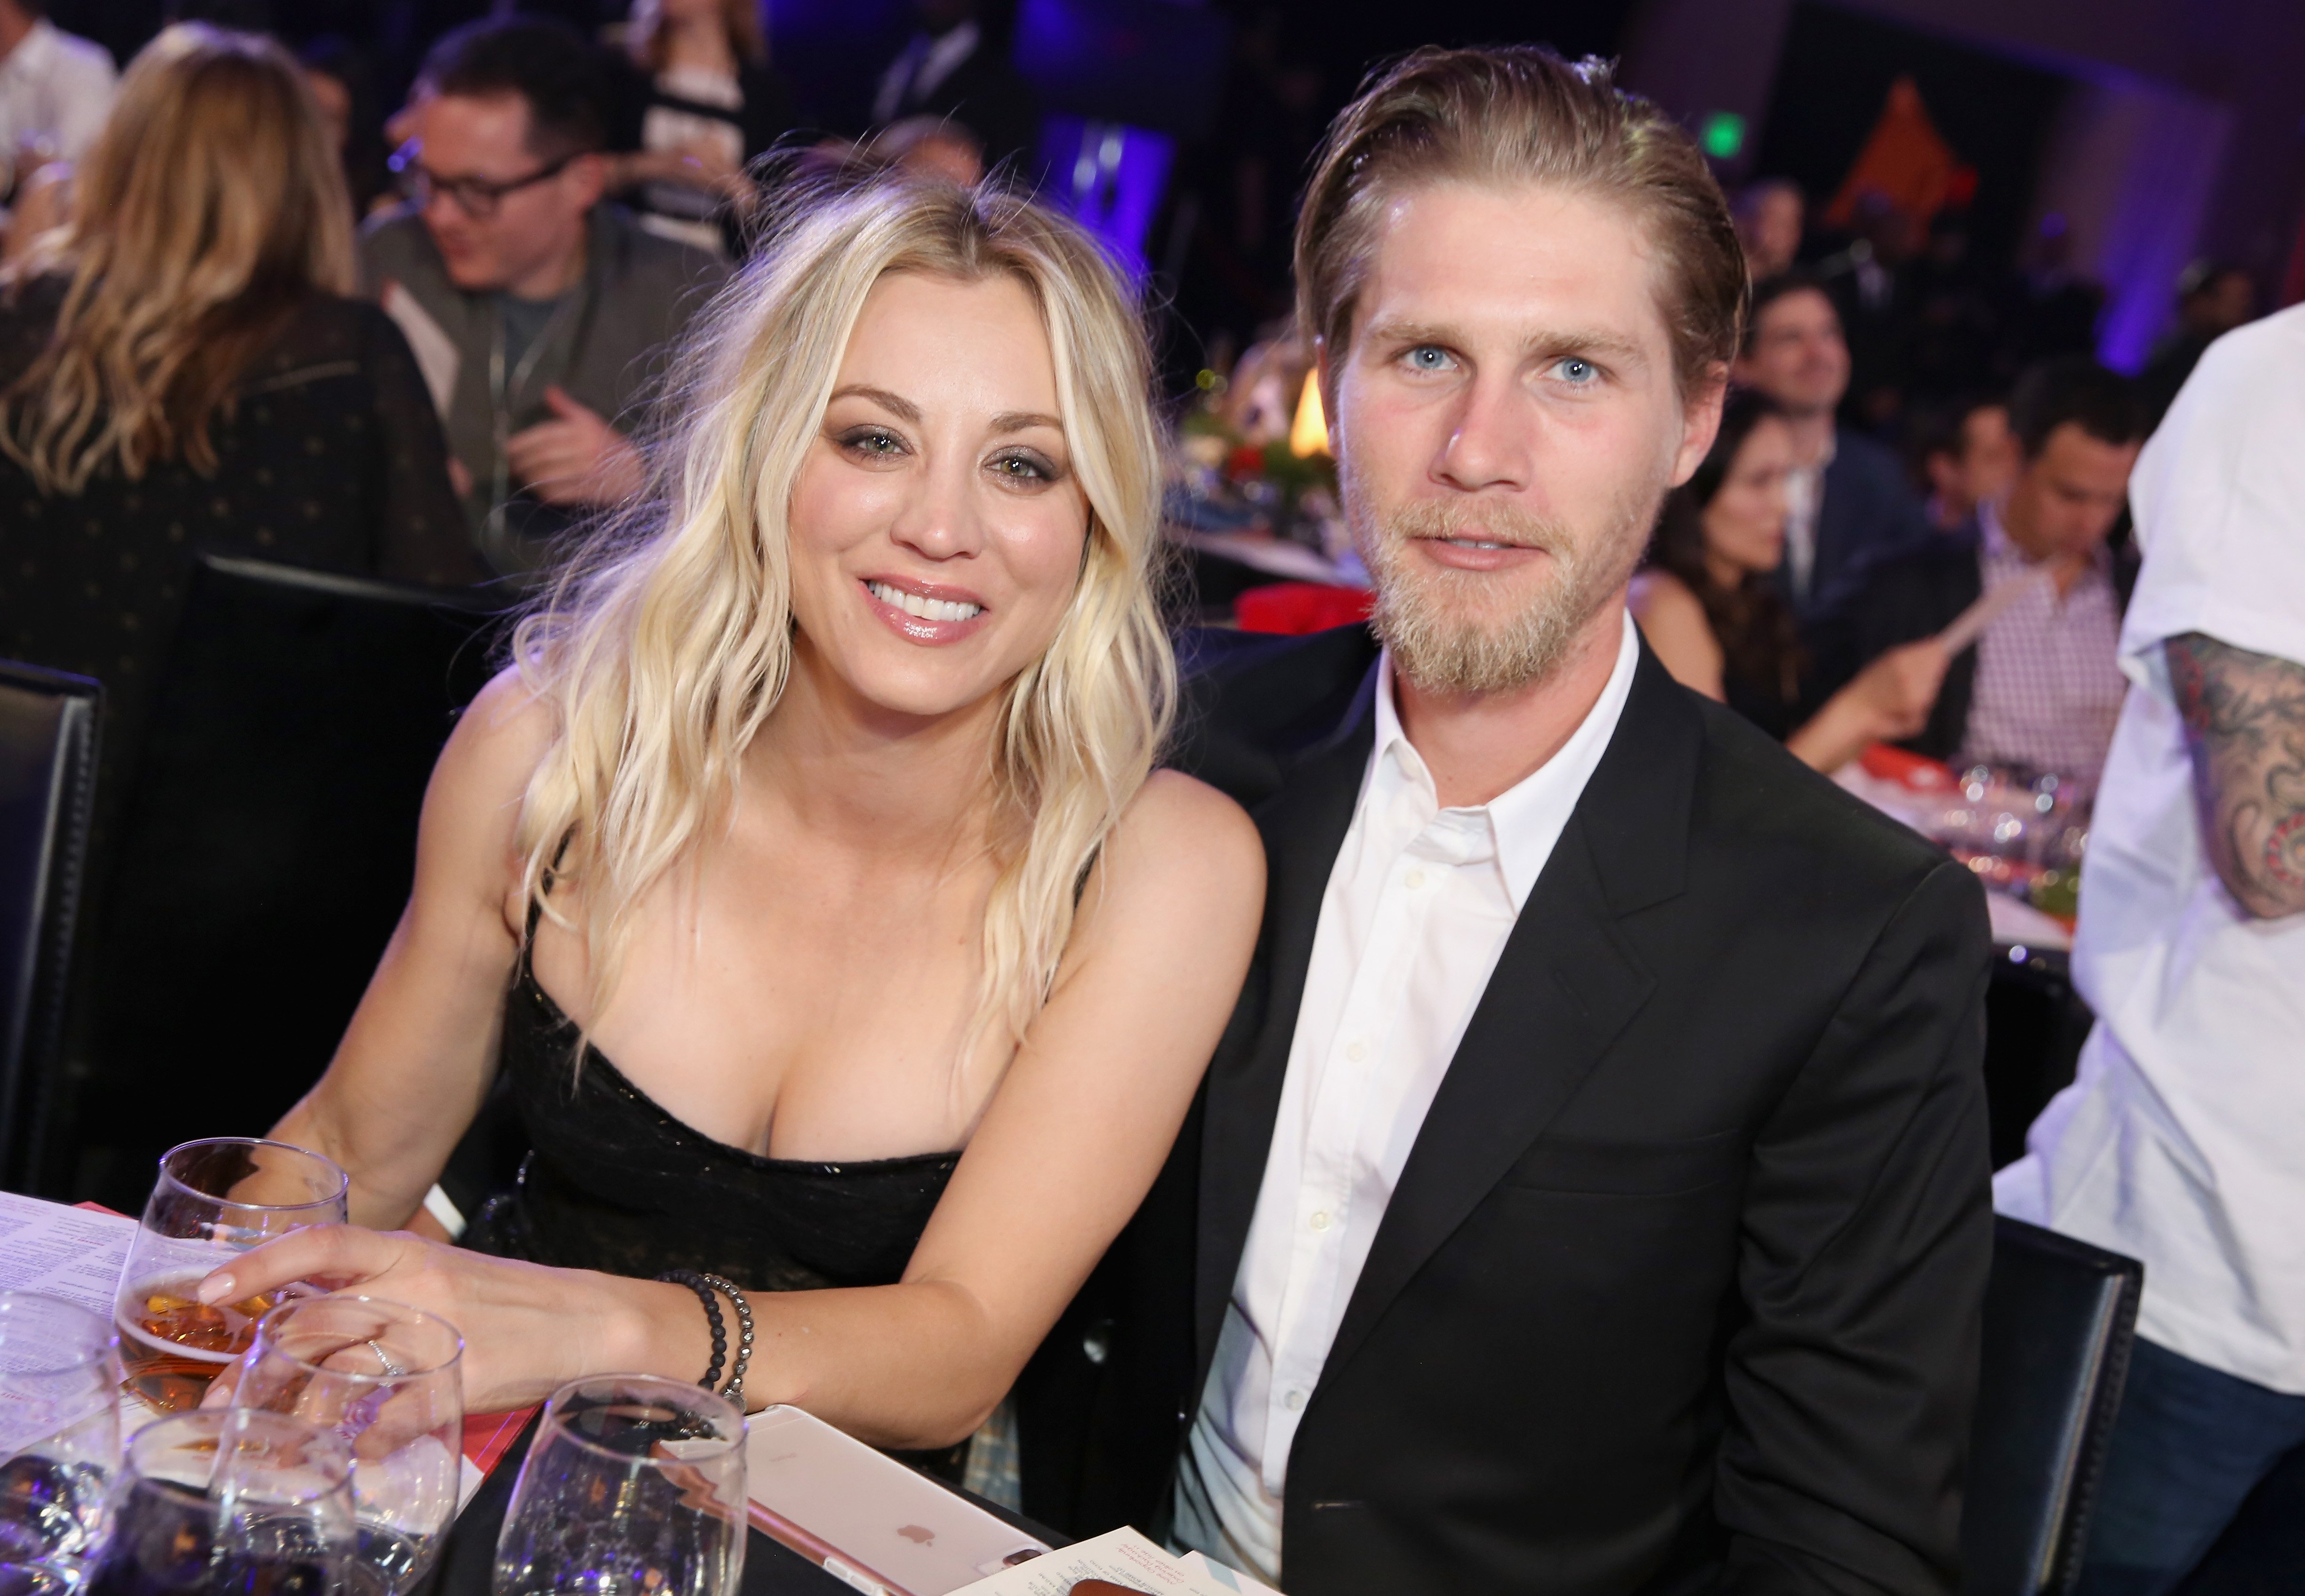 Kaley Cuoco and Karl Cook at Seth Rogen's Hilarity For Charity at Hollywood Palladium in Los Angeles, California | Photo: Rachel Murray/Getty Images for Netflix